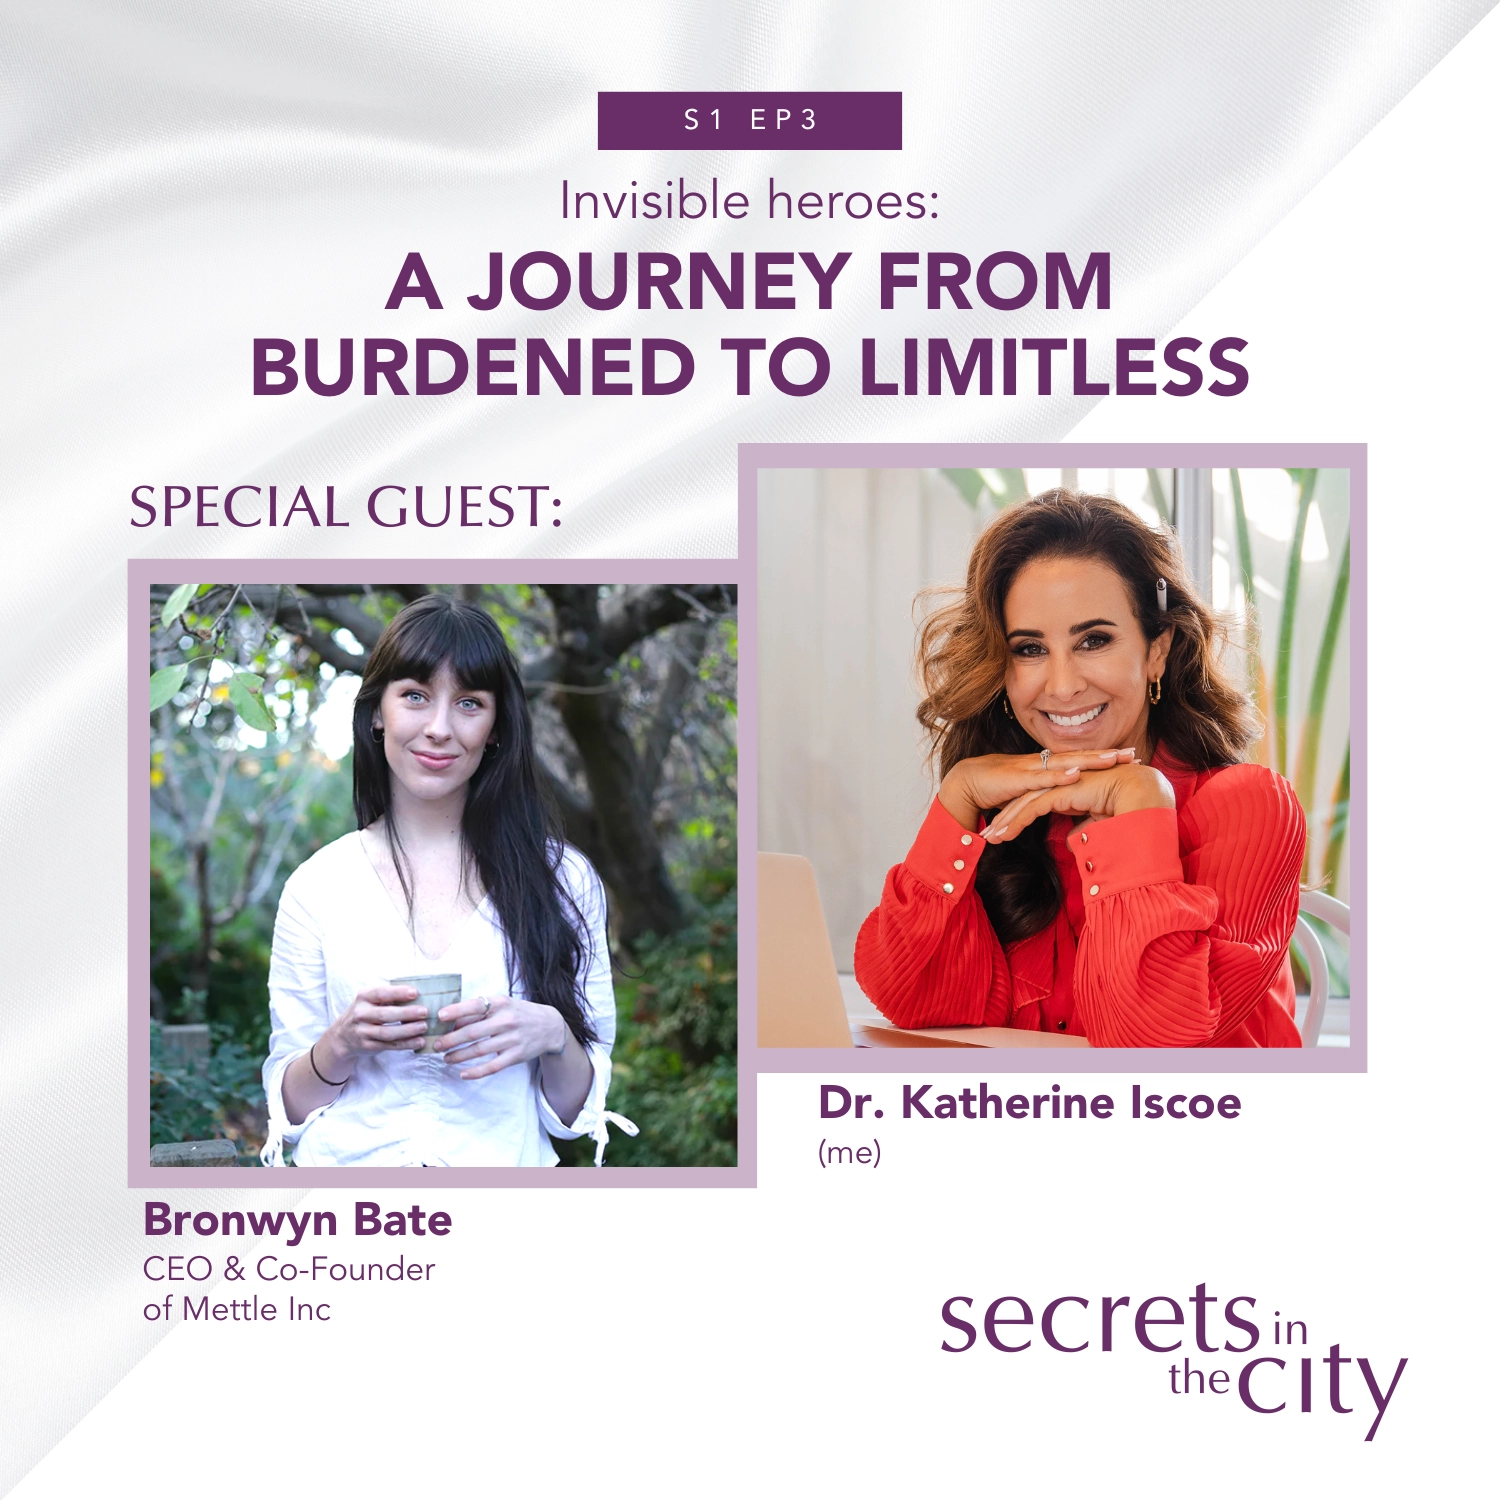 Secrets in the City podcast cover featuring photos of Bronwyn Bate and Dr. Katherine Iscoe